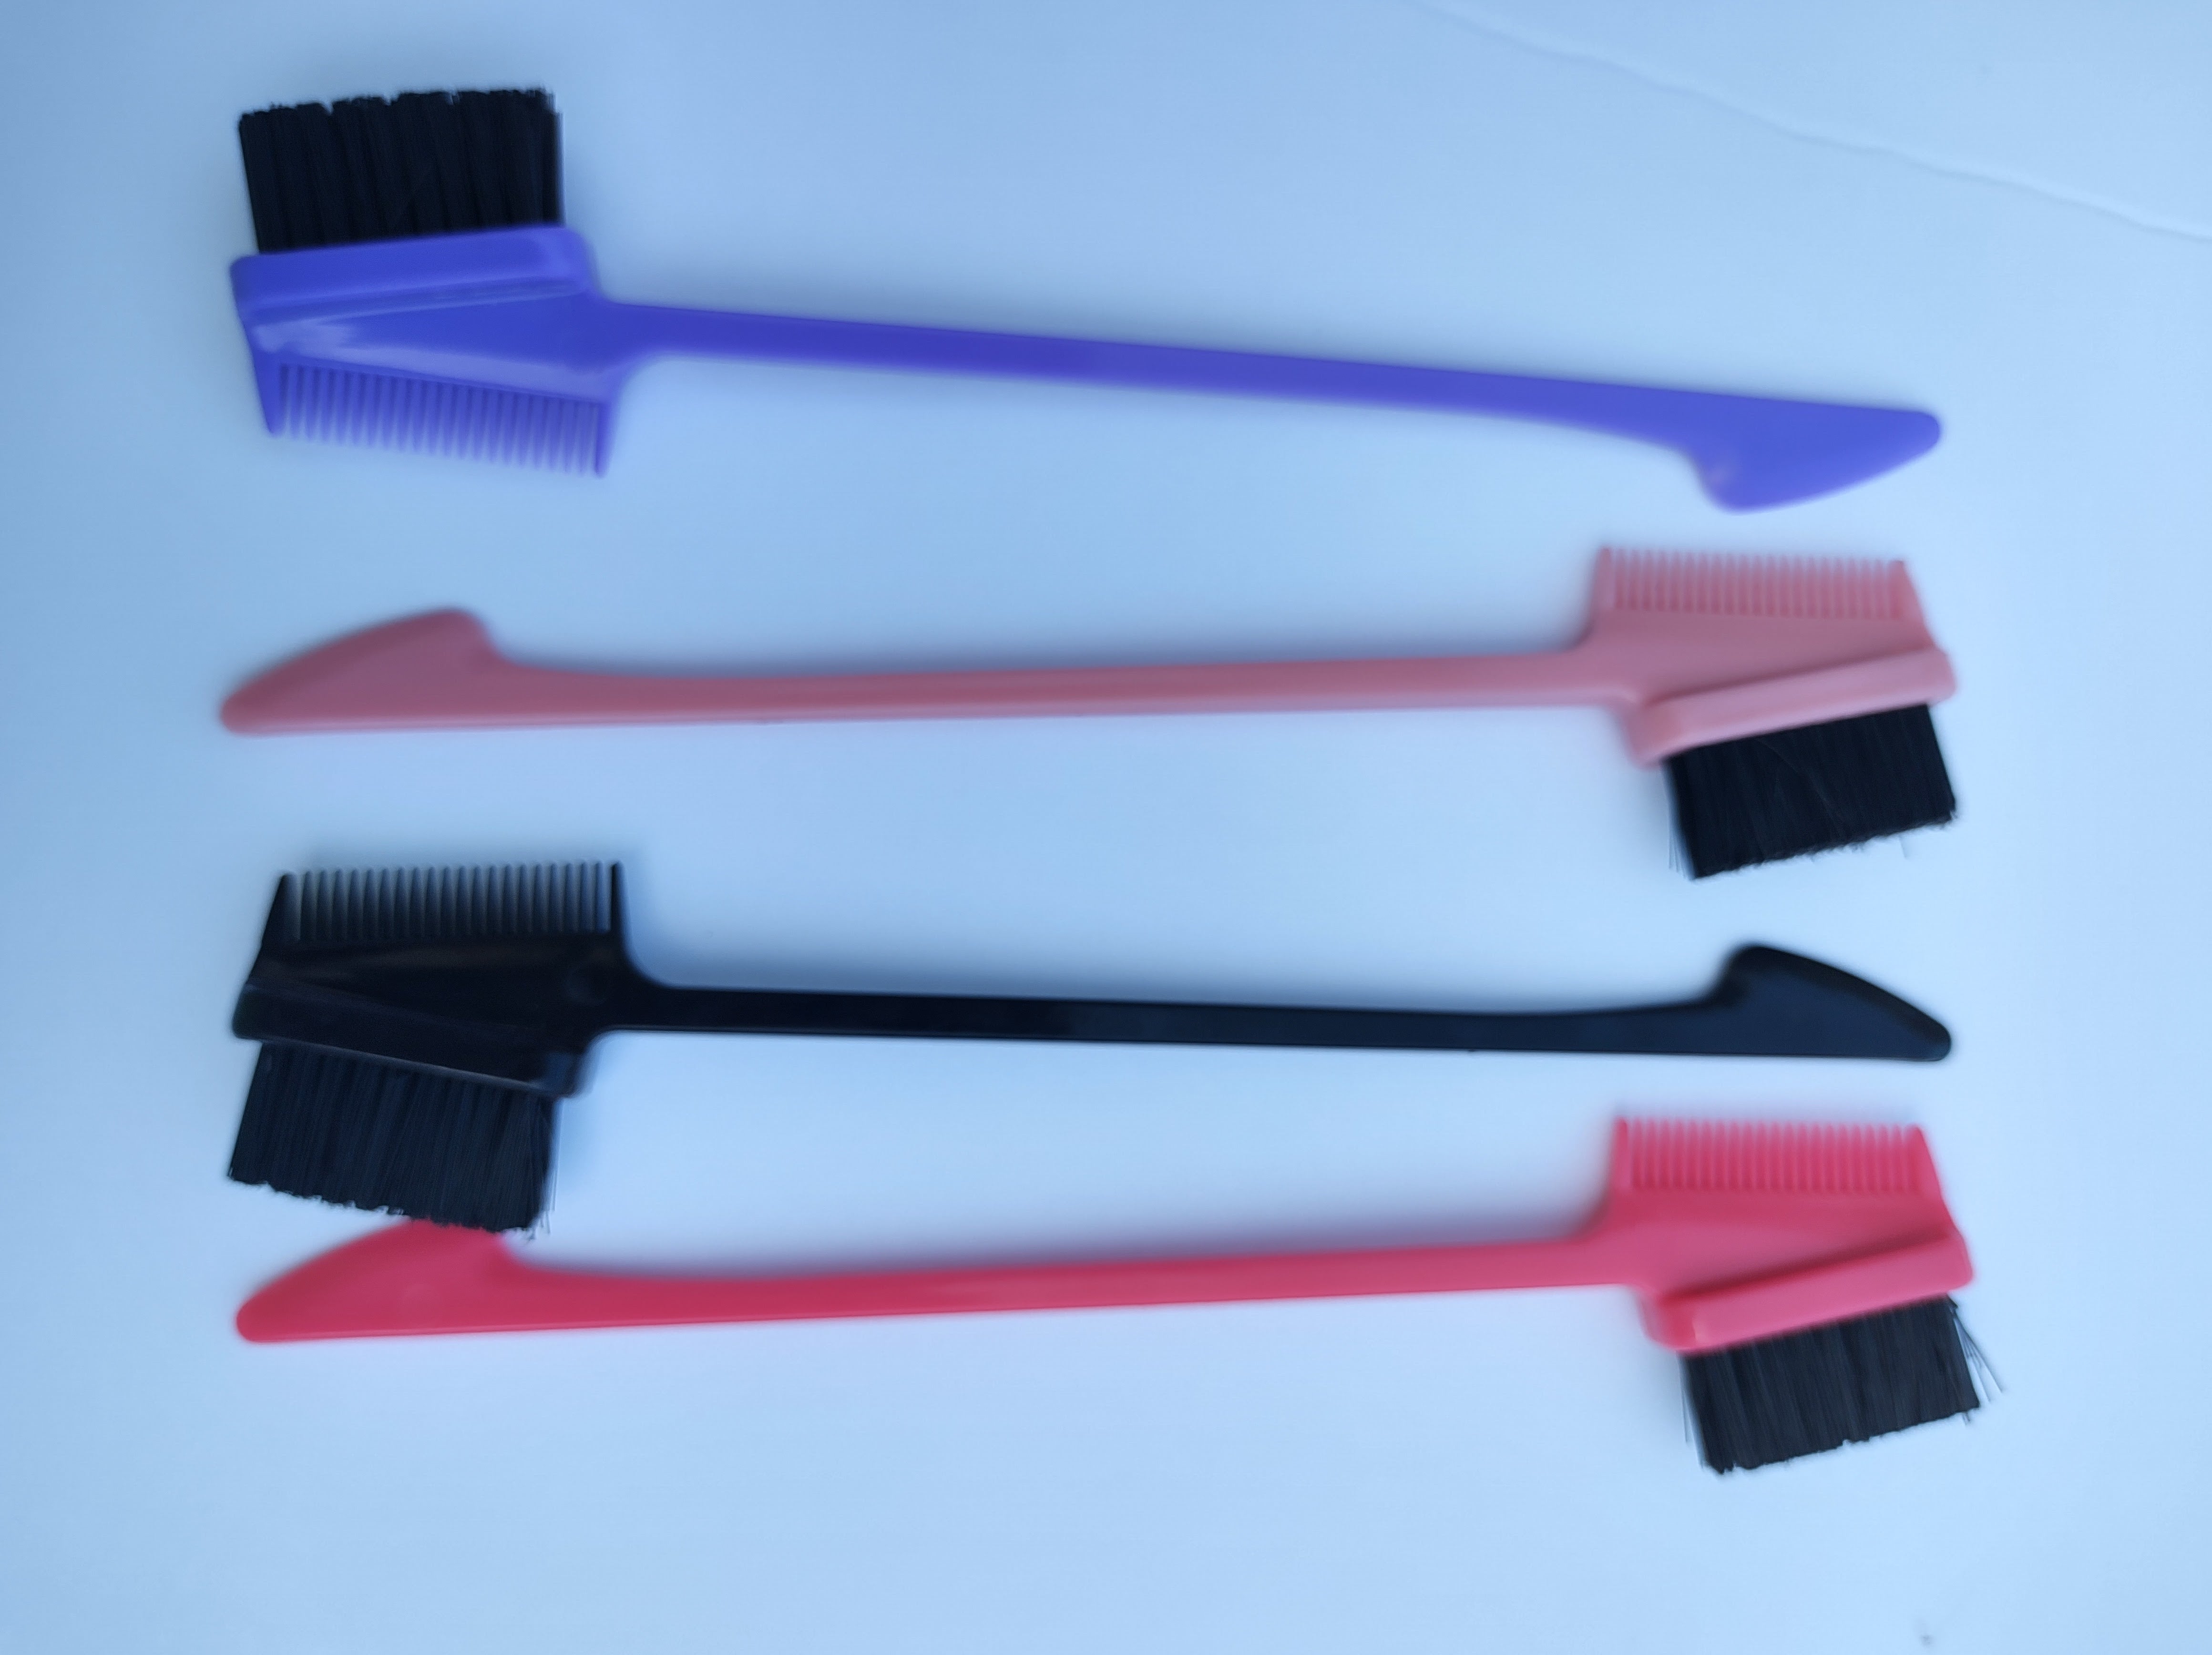 3-in-1 Double-Sided Edge Control Hair Brush